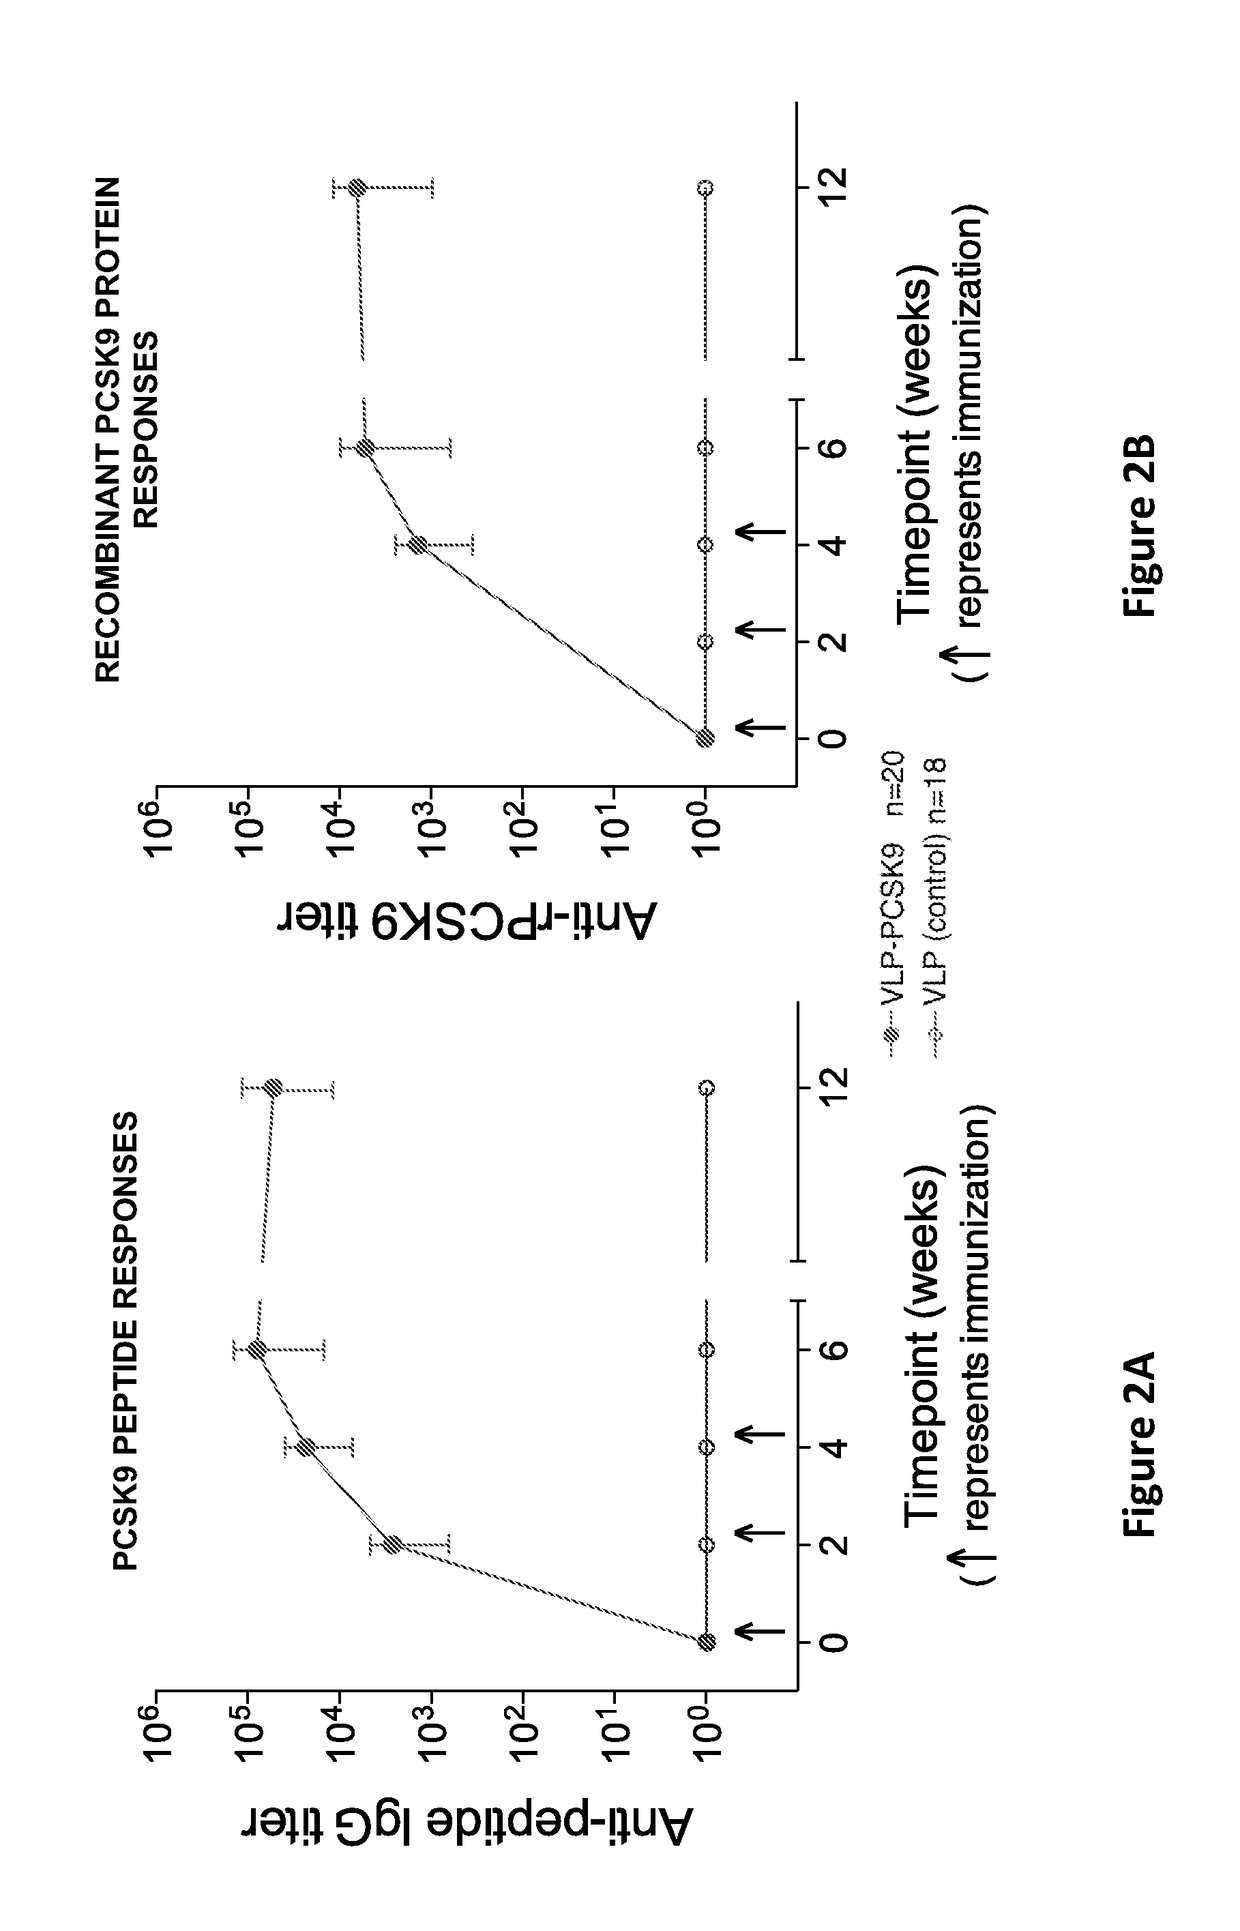 Pcsk9 vaccine and methods of using the same